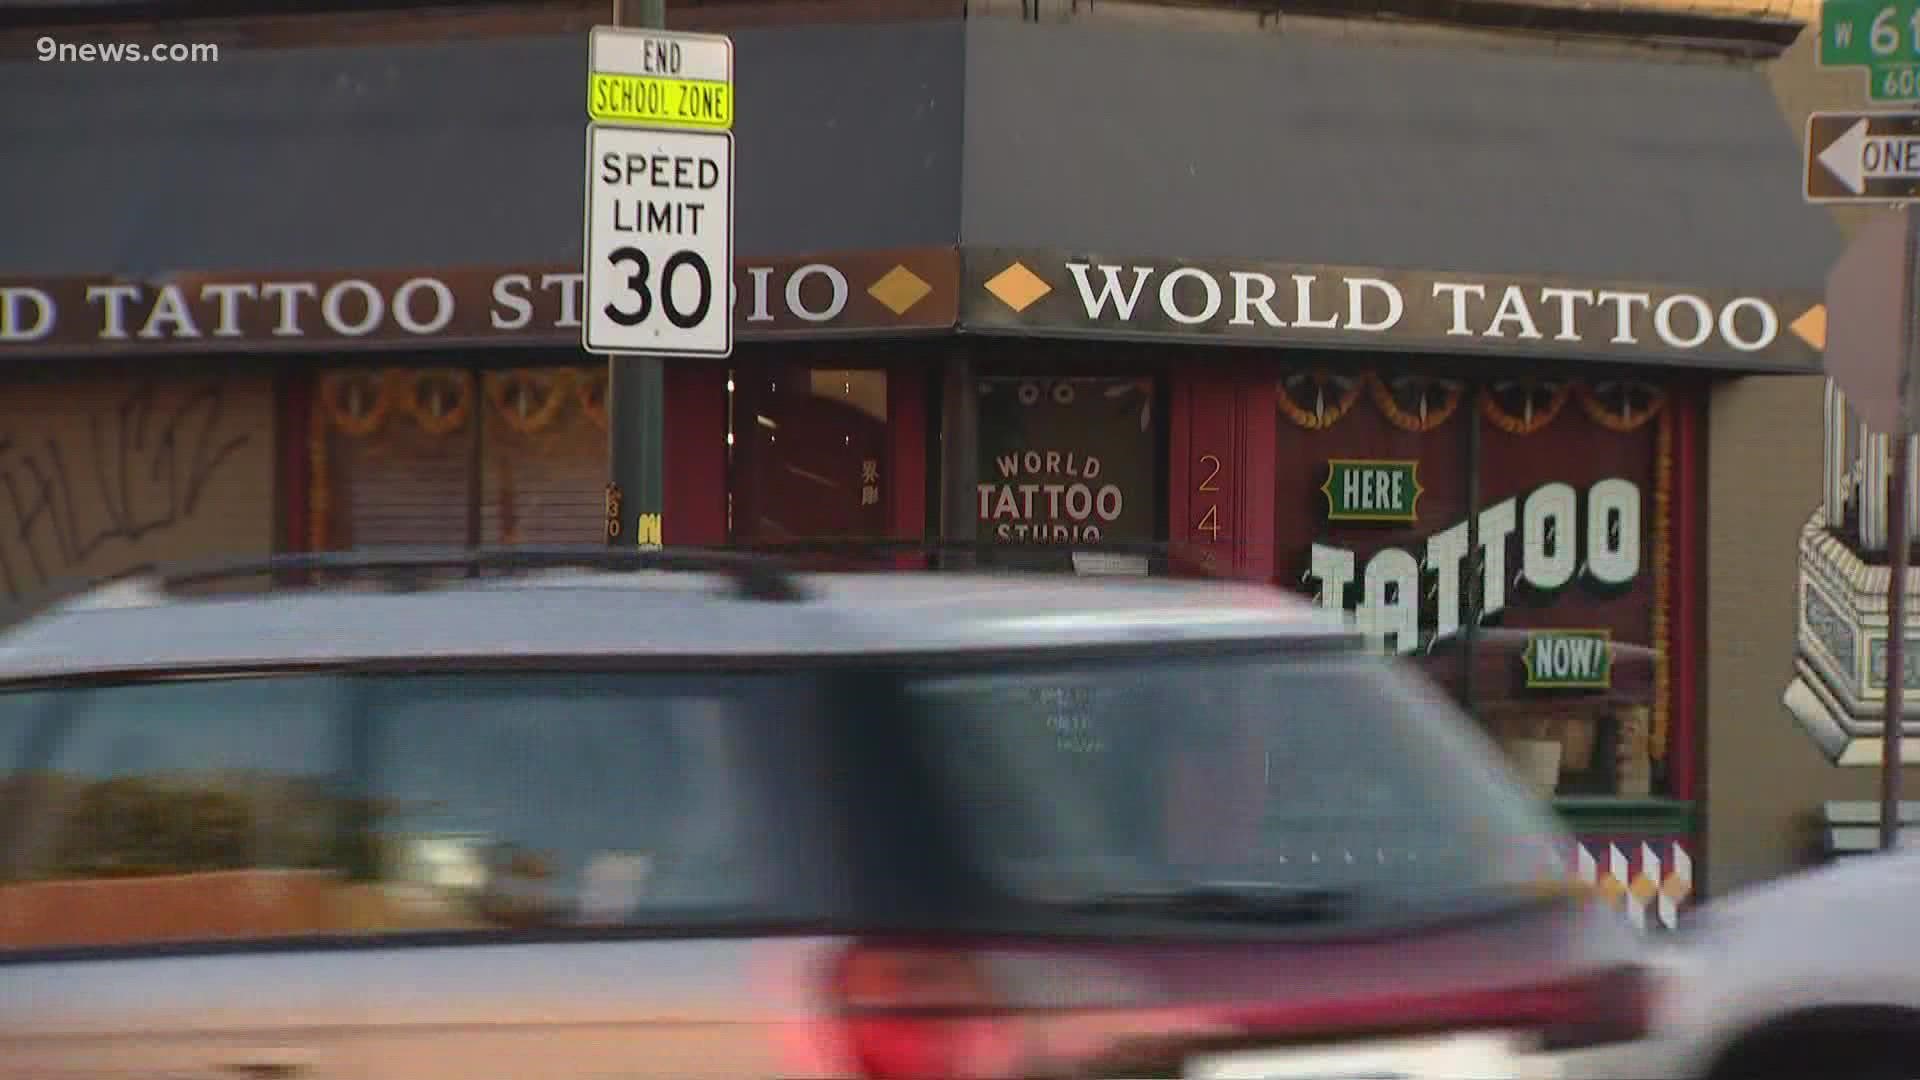 Jeremy Costilow said he and the shooter were in the tattoo business together several years ago.